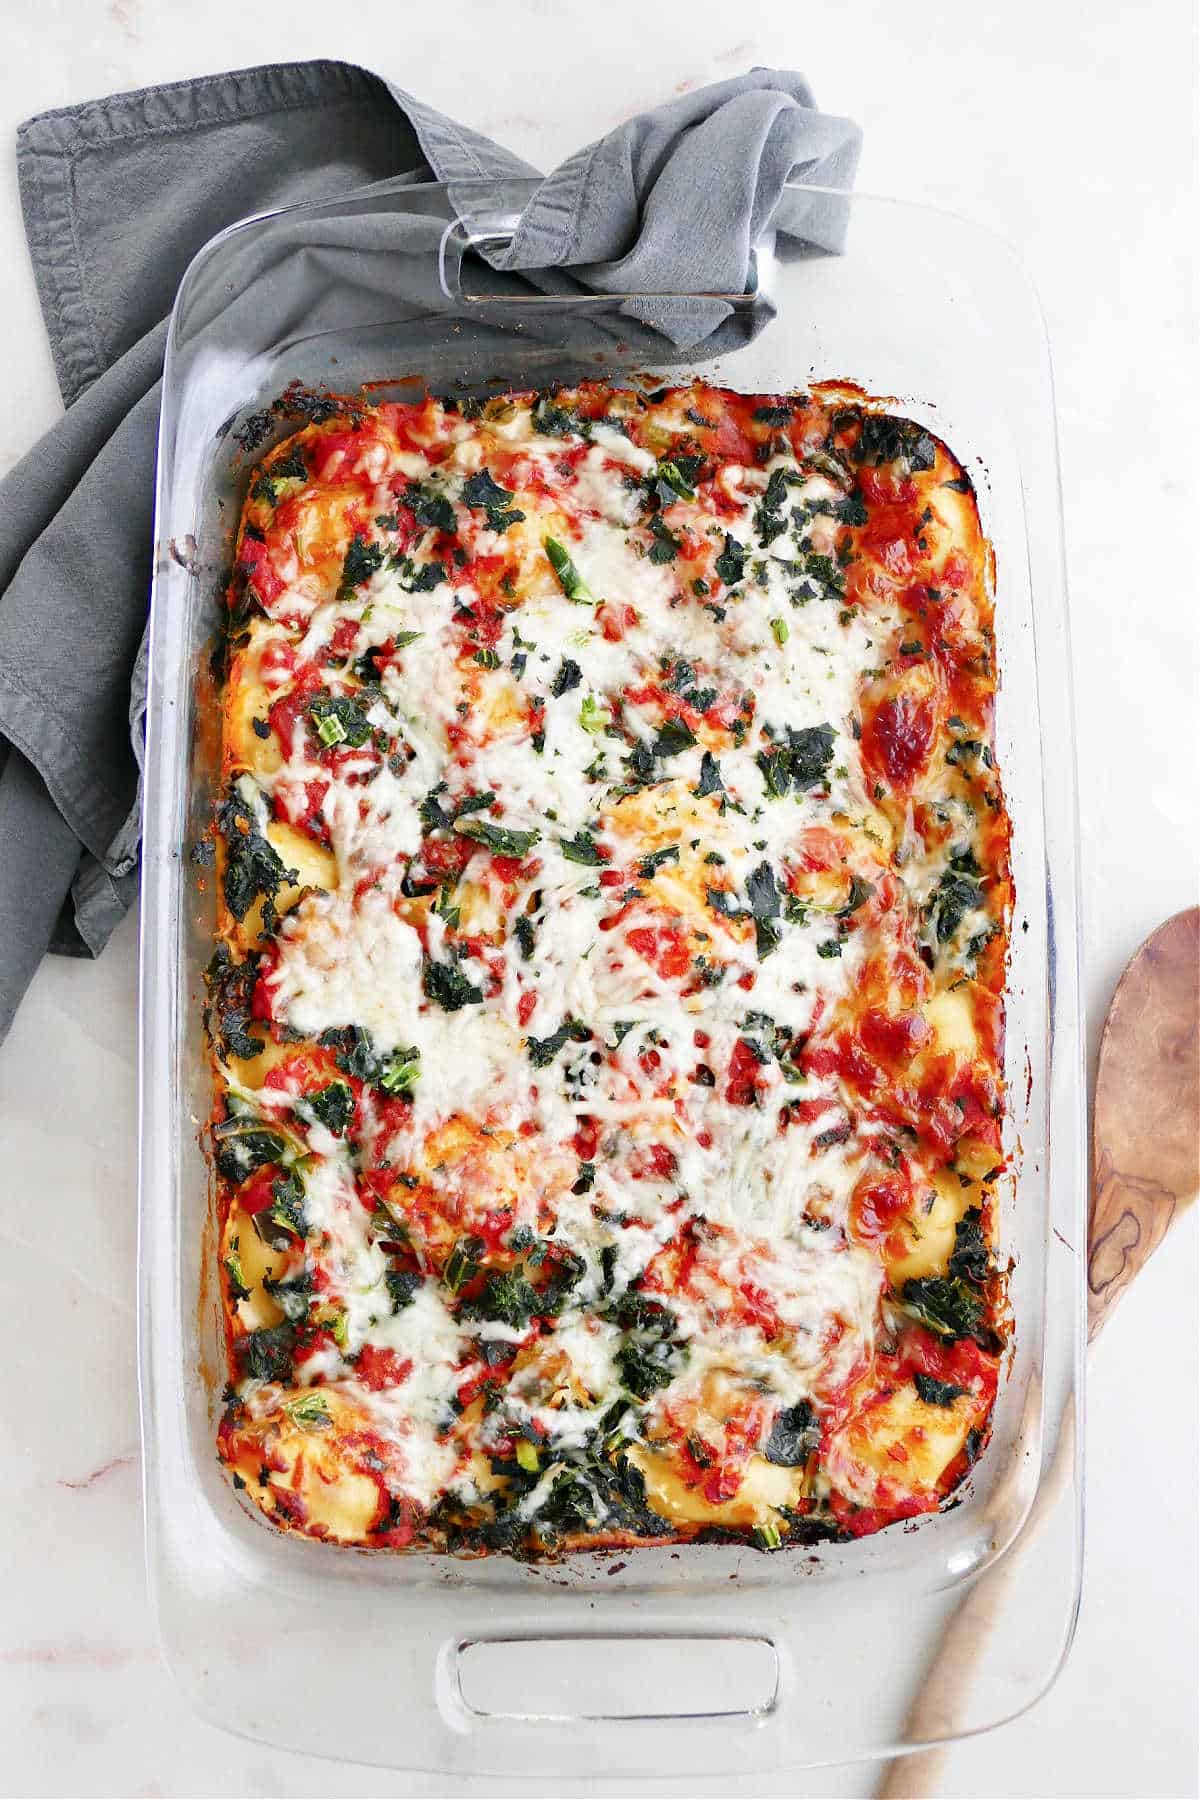 baked ravioli casserole with kale in a glass dish on a counter